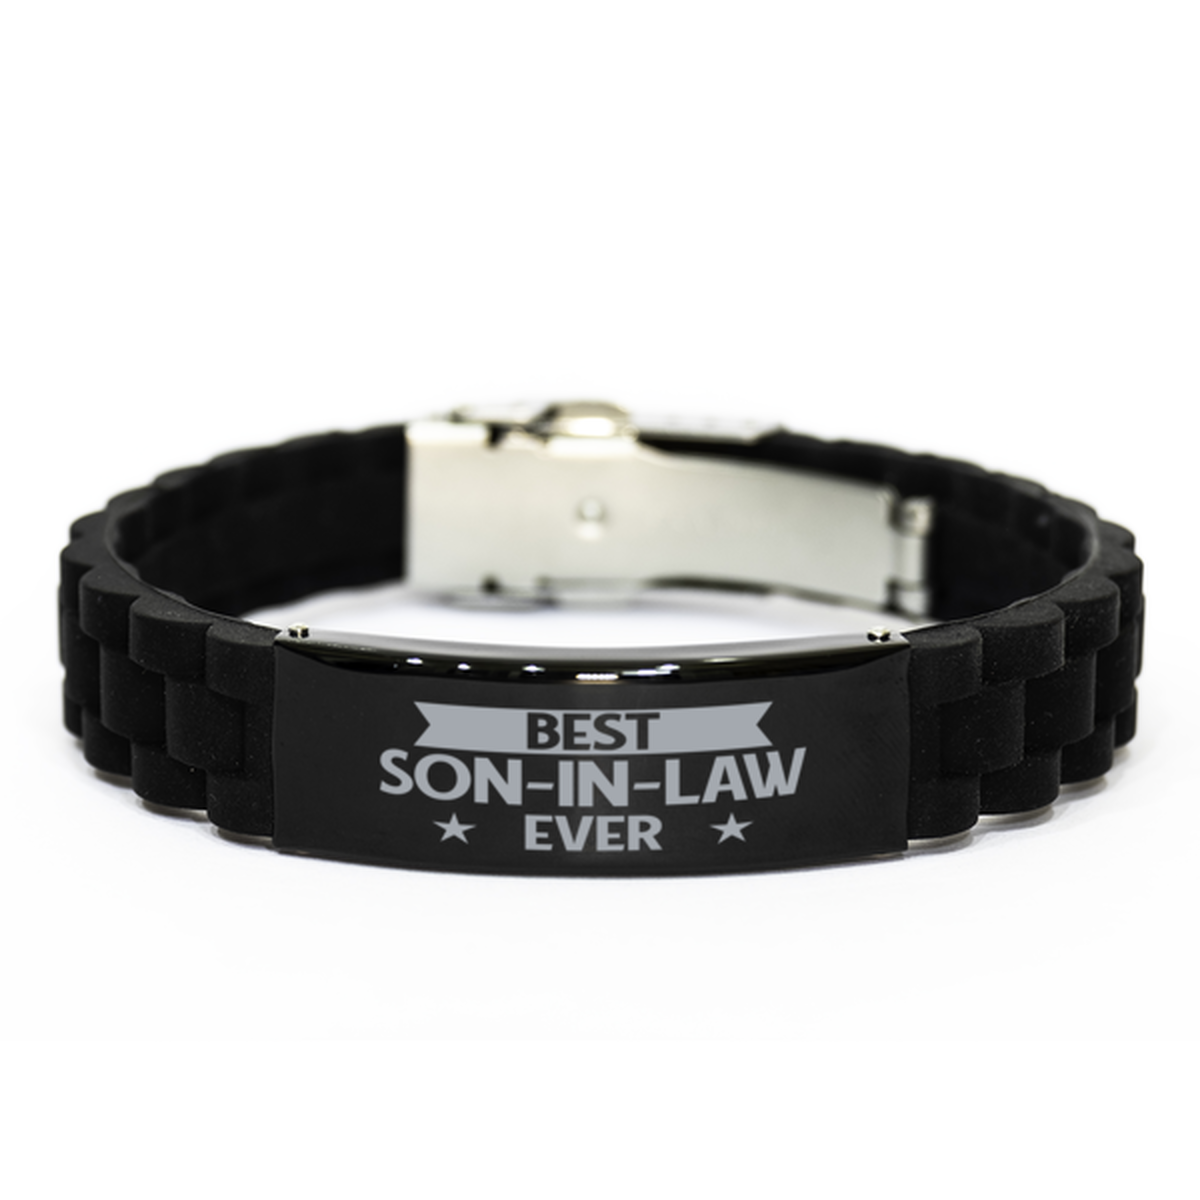 Best Son-in-law Ever Son-in-law Gifts, Funny Black Engraved Bracelet For Son-in-law, Family Gifts For Men